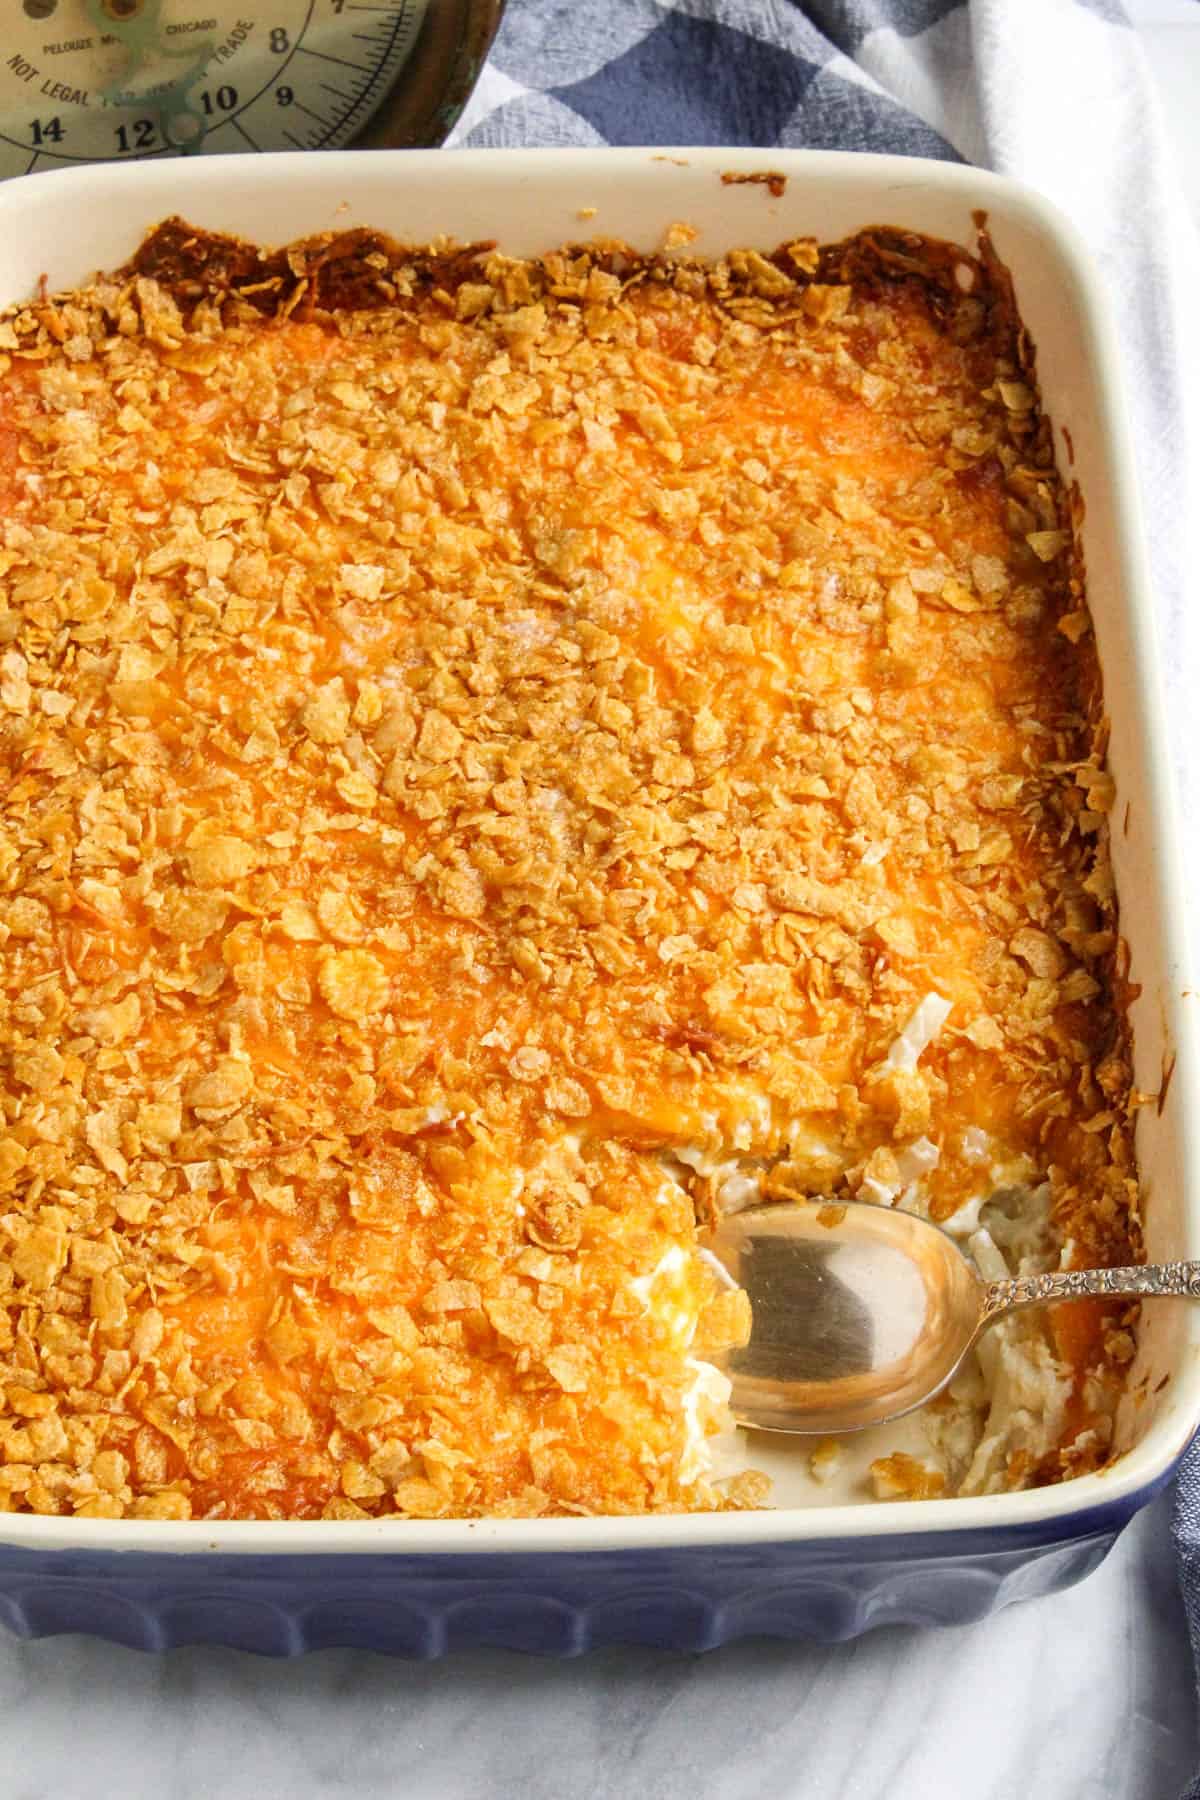 Cheesy potato casserole in baking dish with serving spoon.